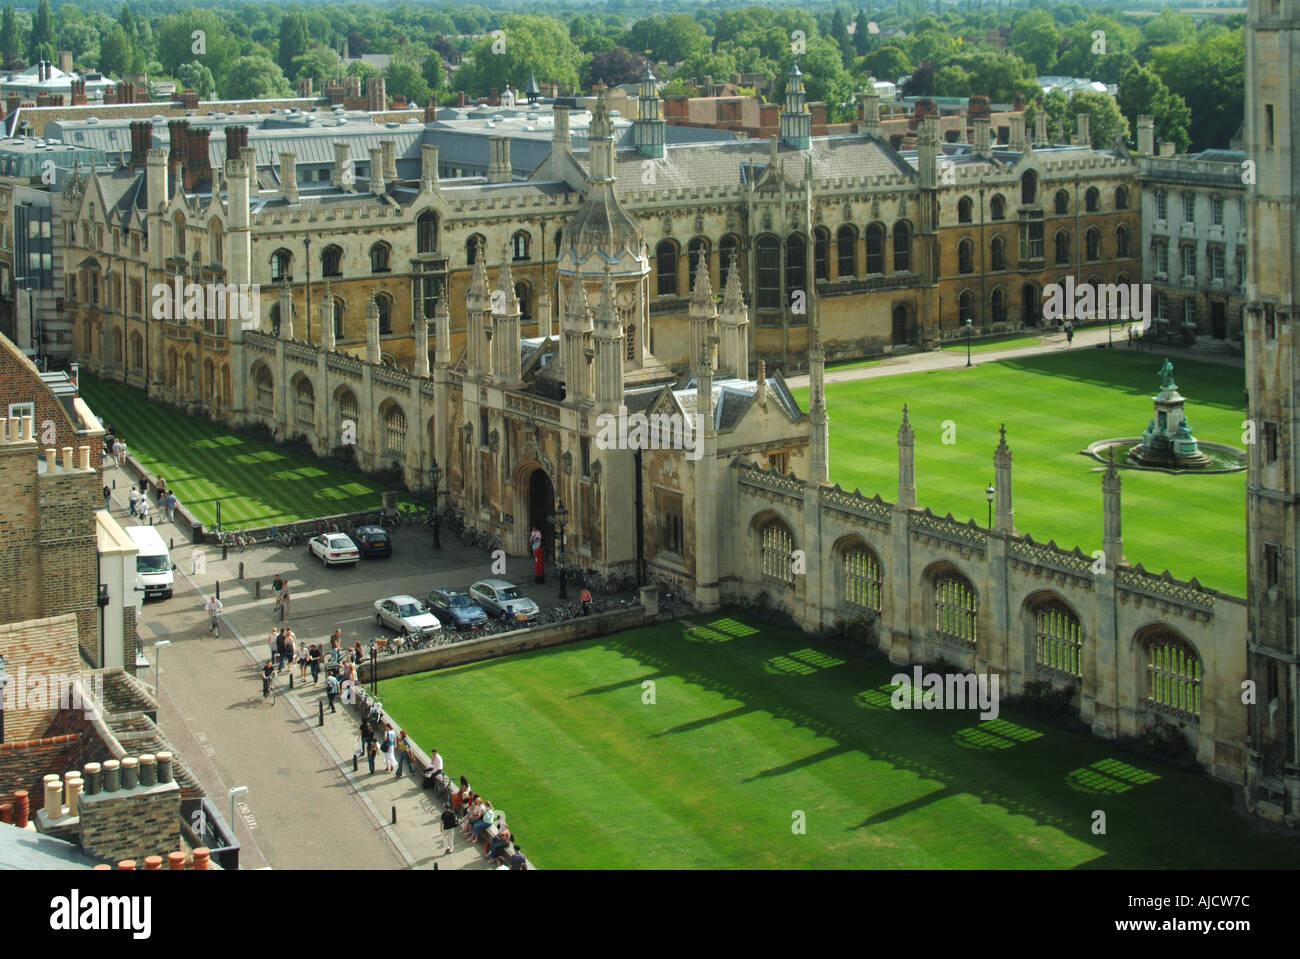 Cambridge university town looking down on part of the Kings College ornate screens along Kings Parade Stock Photo